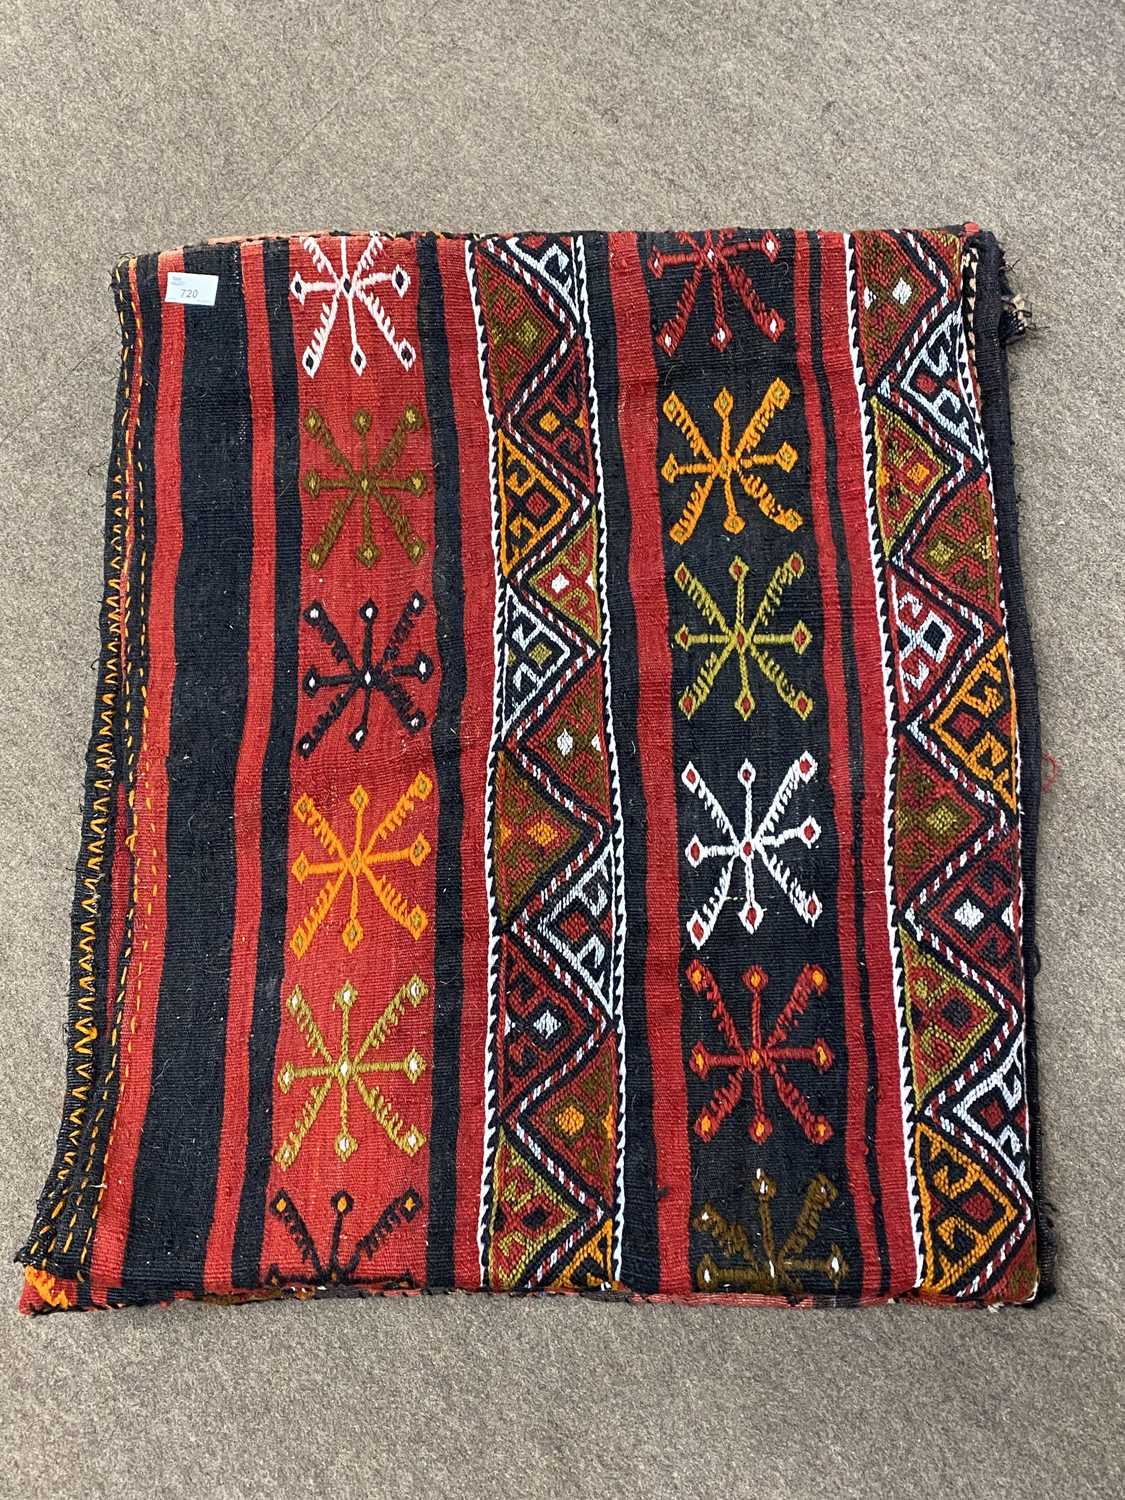 Two vintage carpet saddlebags, the largest 23 x 47 inches (2)